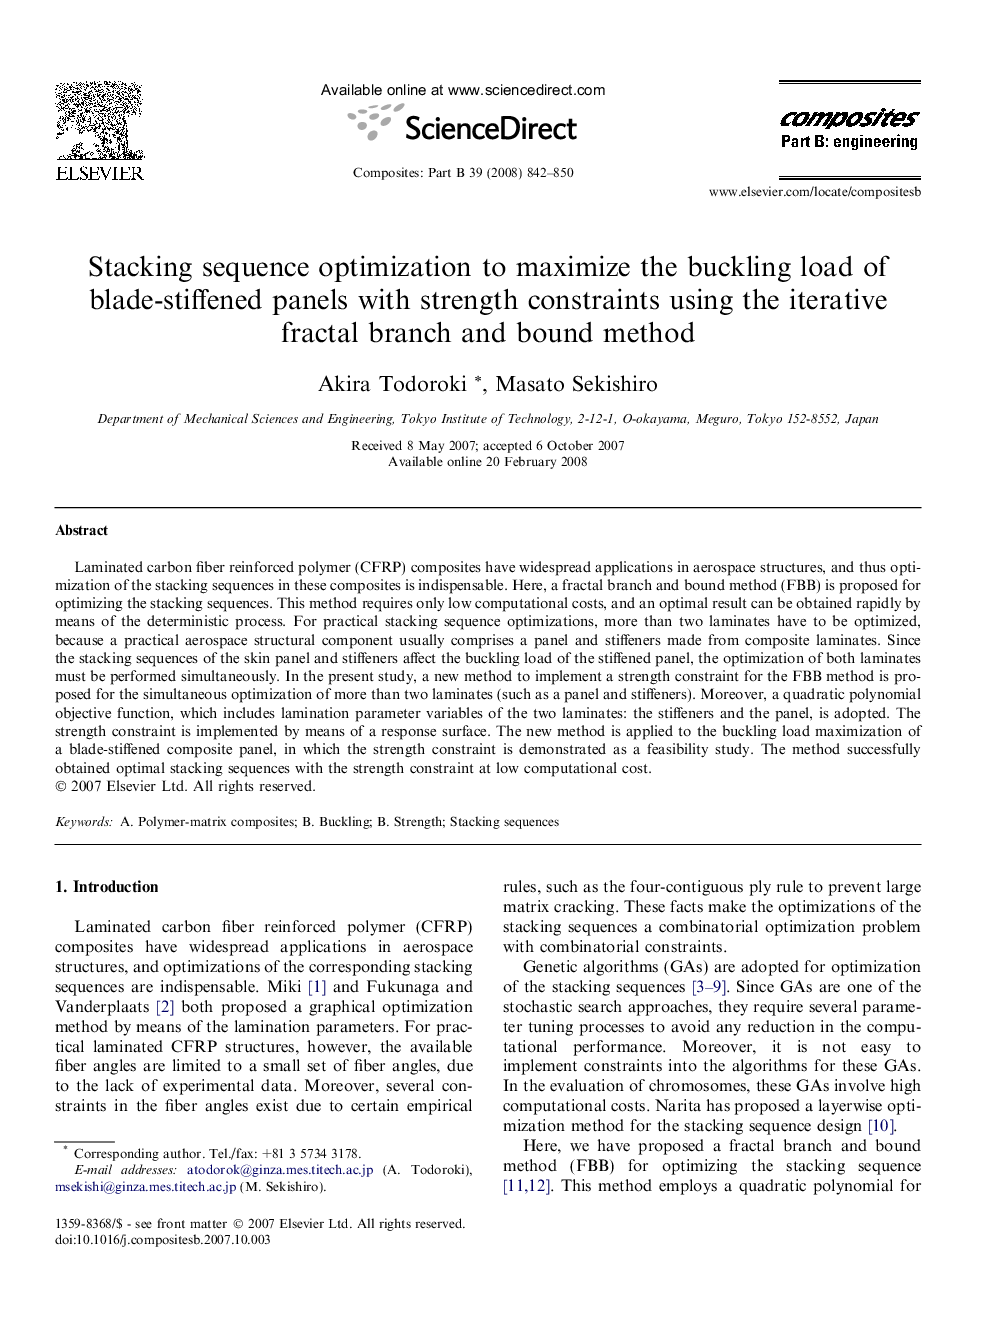 Stacking sequence optimization to maximize the buckling load of blade-stiffened panels with strength constraints using the iterative fractal branch and bound method